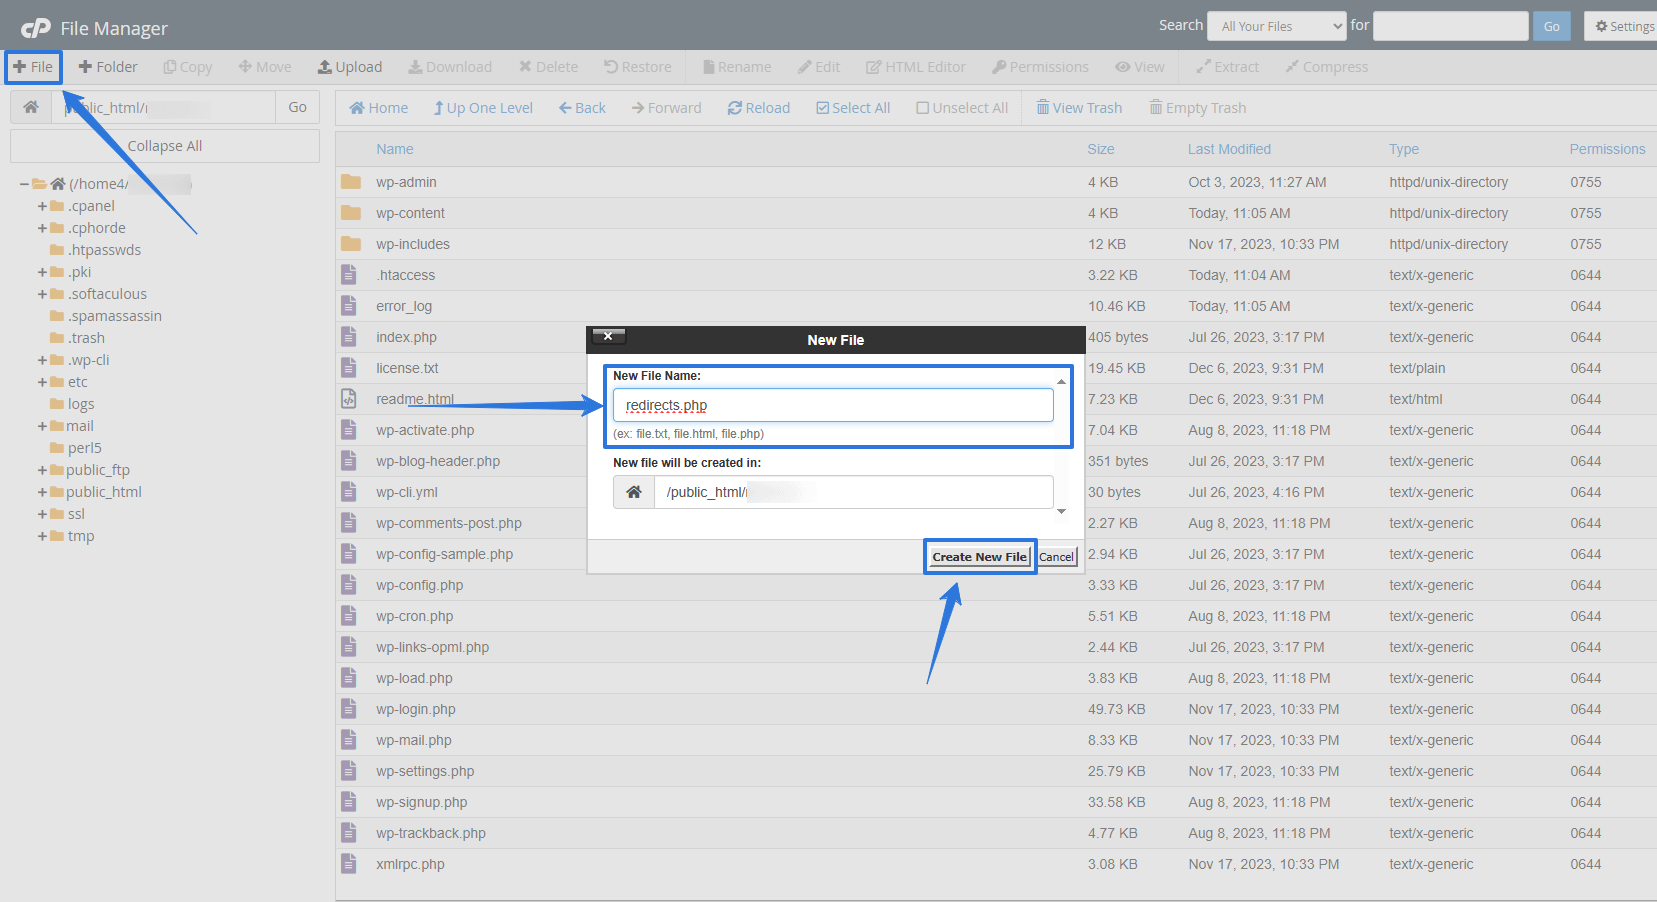 Create a new 301 redirect file and name it “redirects.php.”